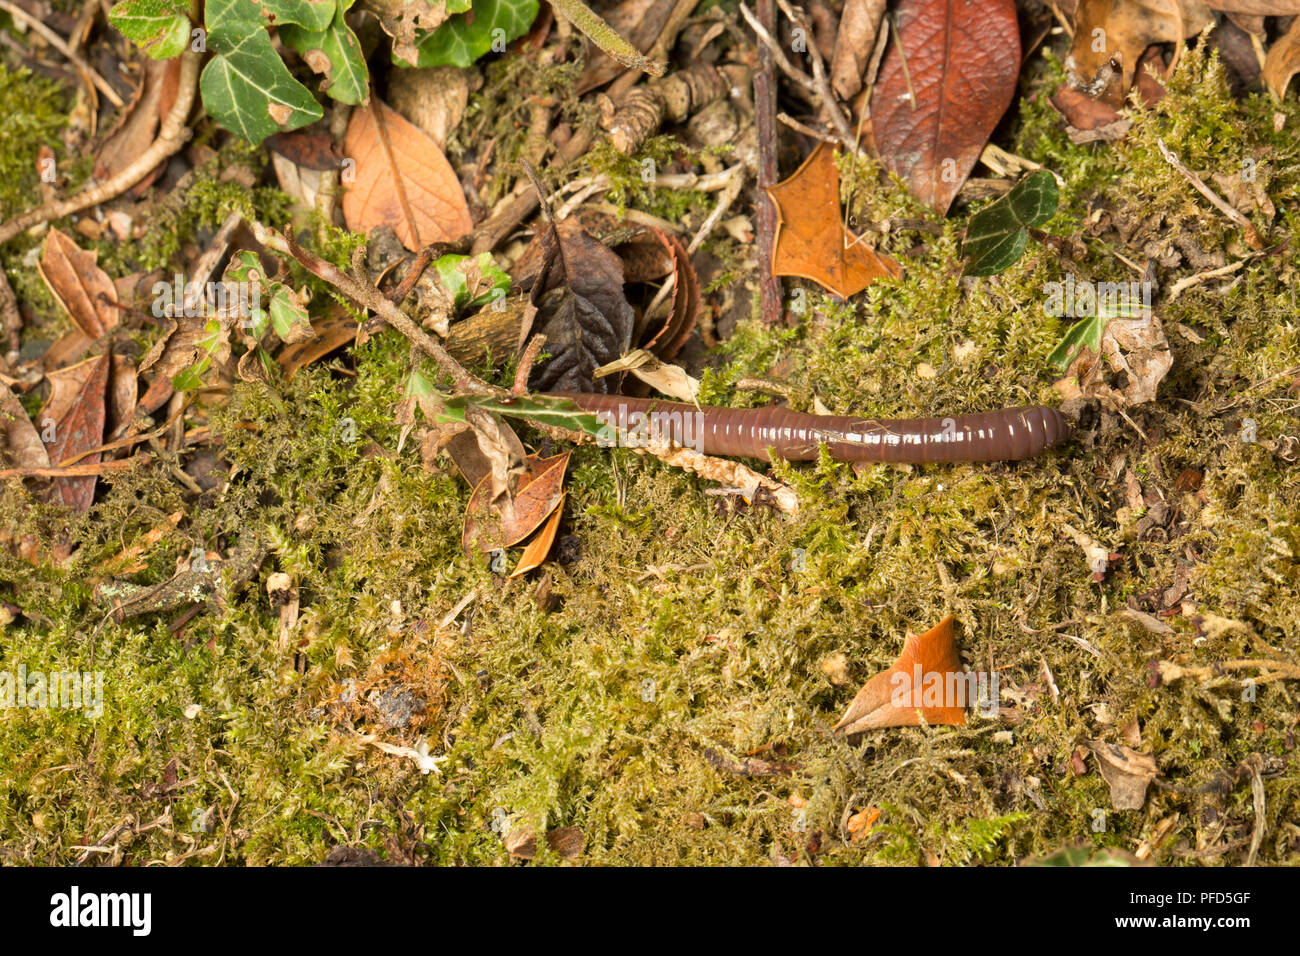 An earthworm on a garden lawn that has emerged from its tunnel at night to look for leaves which it feeds on. Lancashire North West England UK GB Stock Photo